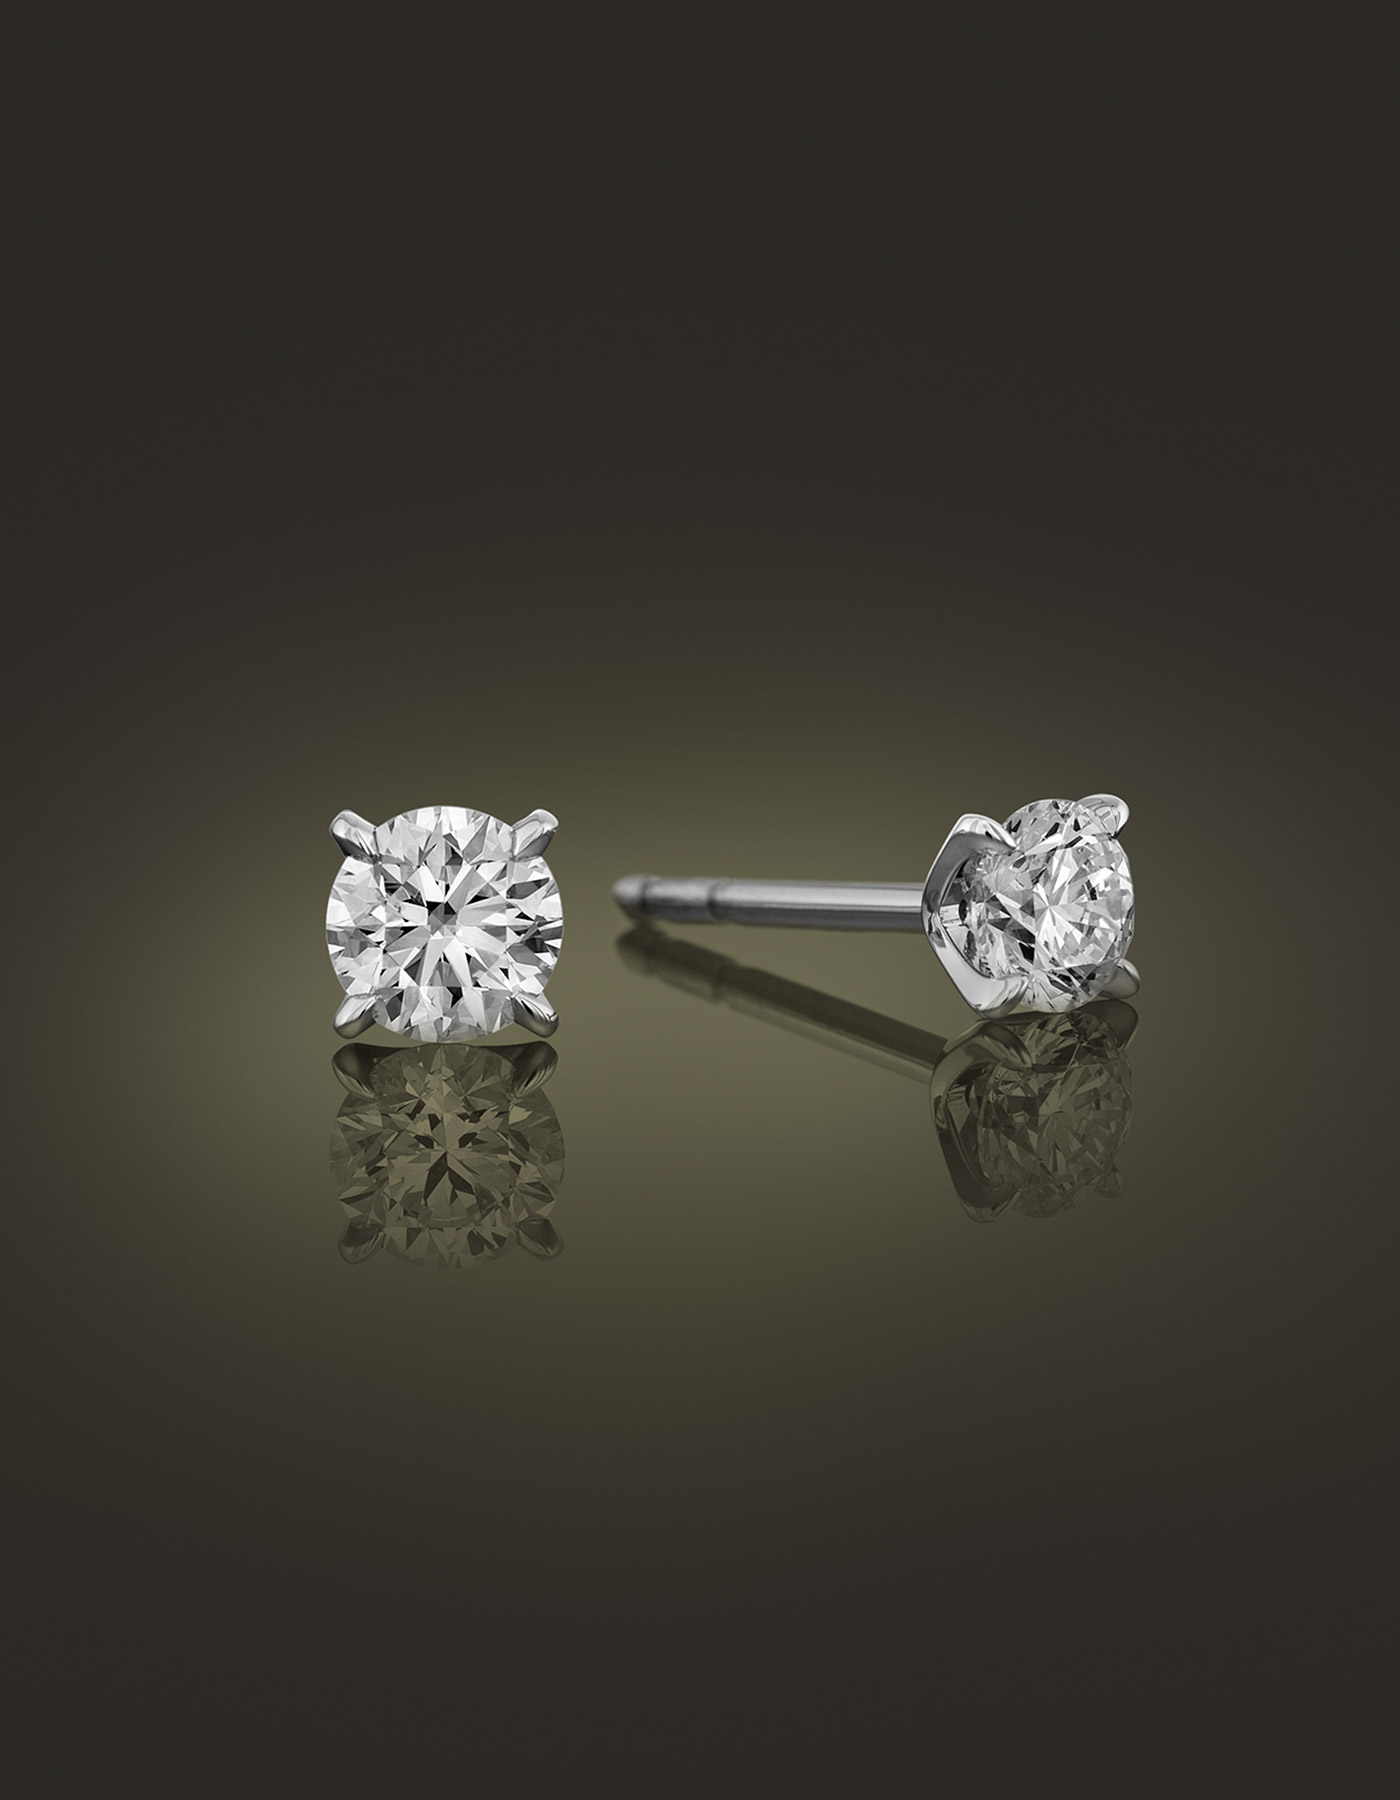 Guinnot Anonymous Solitaire diamond earrings in 18k white gold